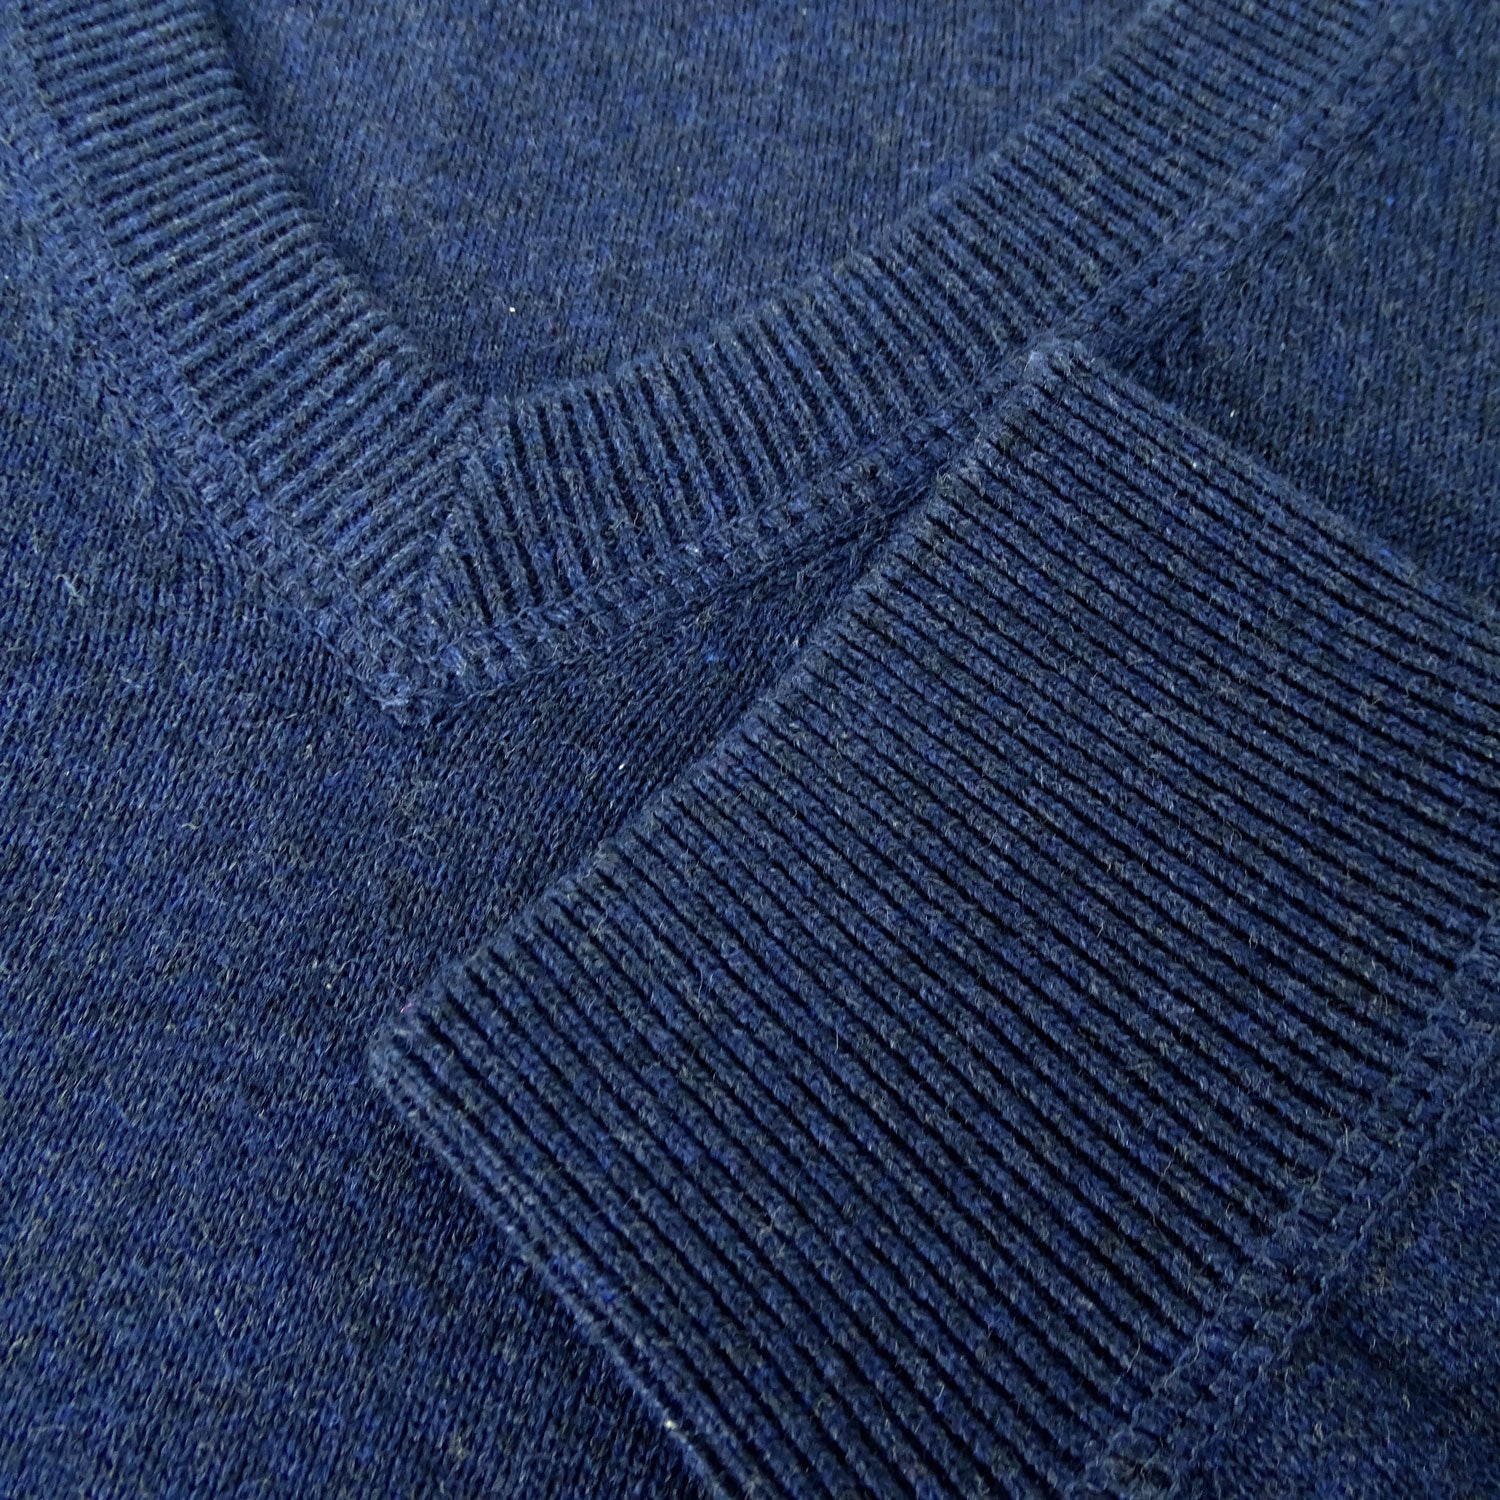 Navy Denim Stirling V Neck Cotton Sweater by Hoggs of Fife 